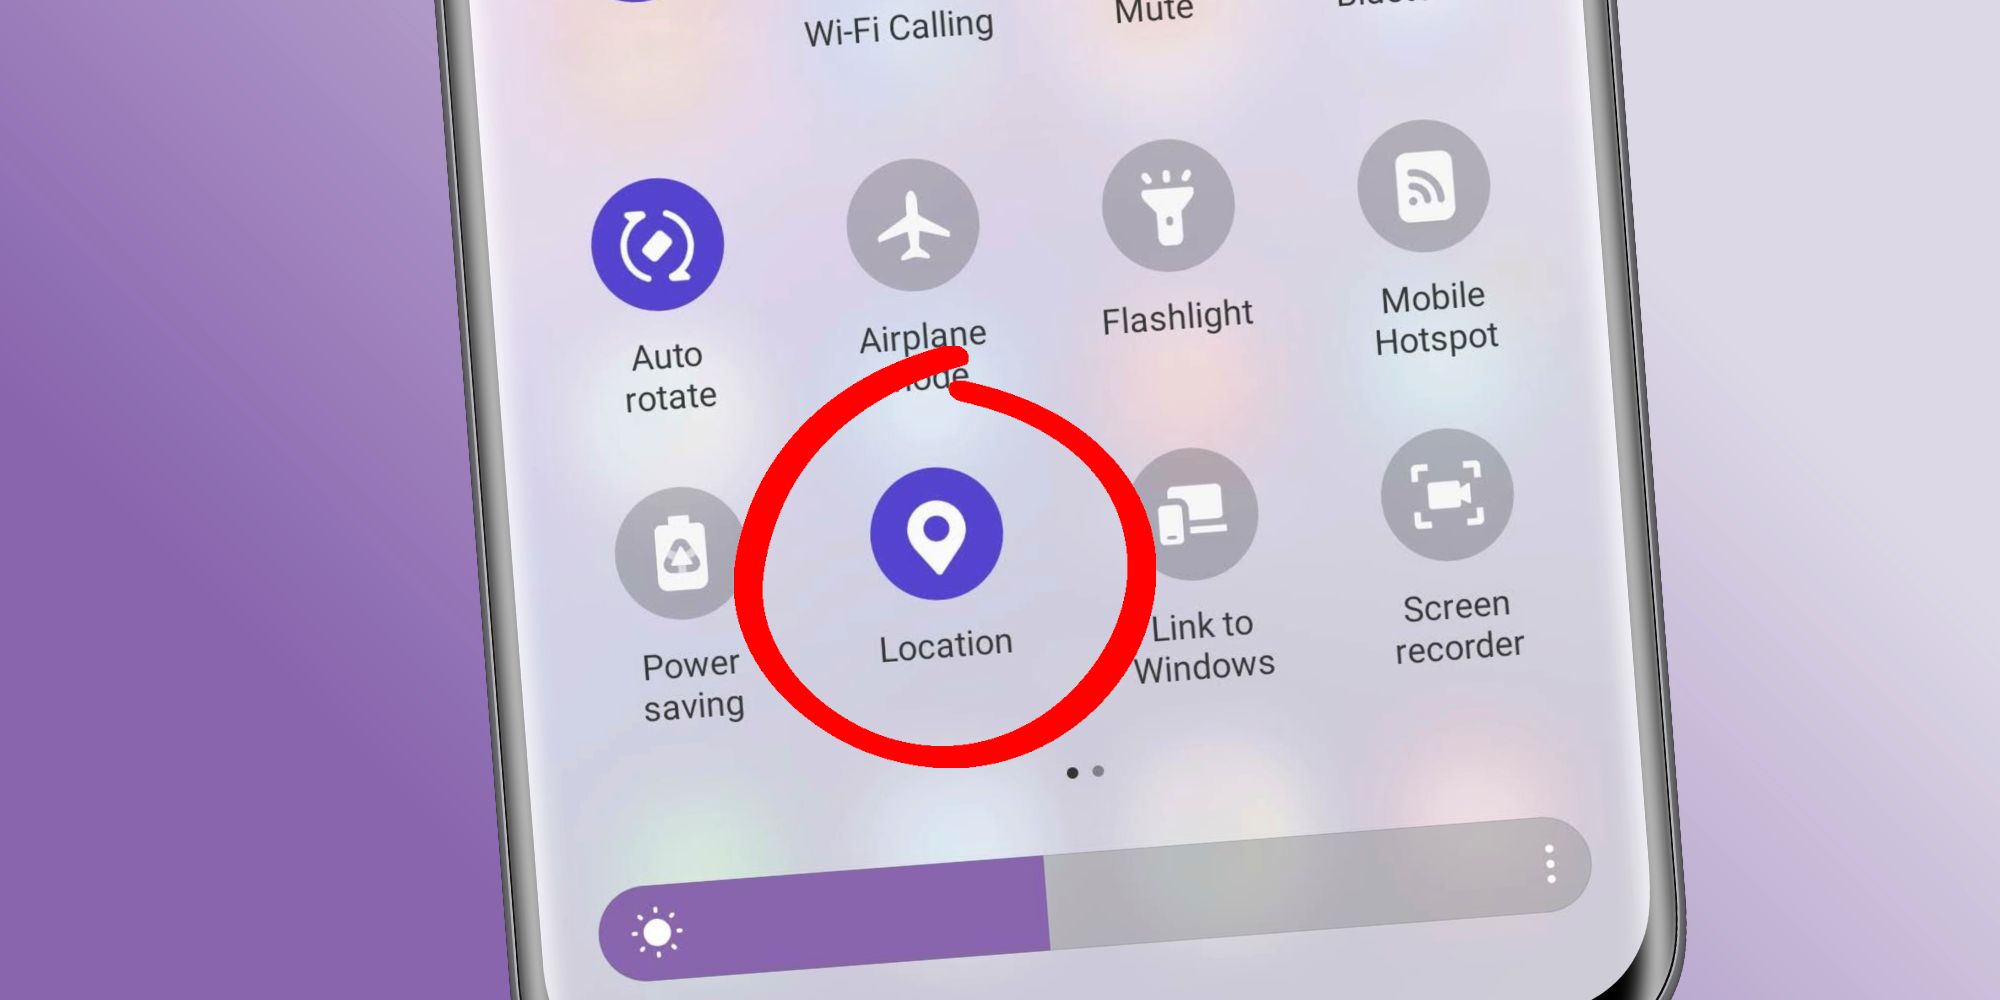 The GPS/Location toggle on an Android phone